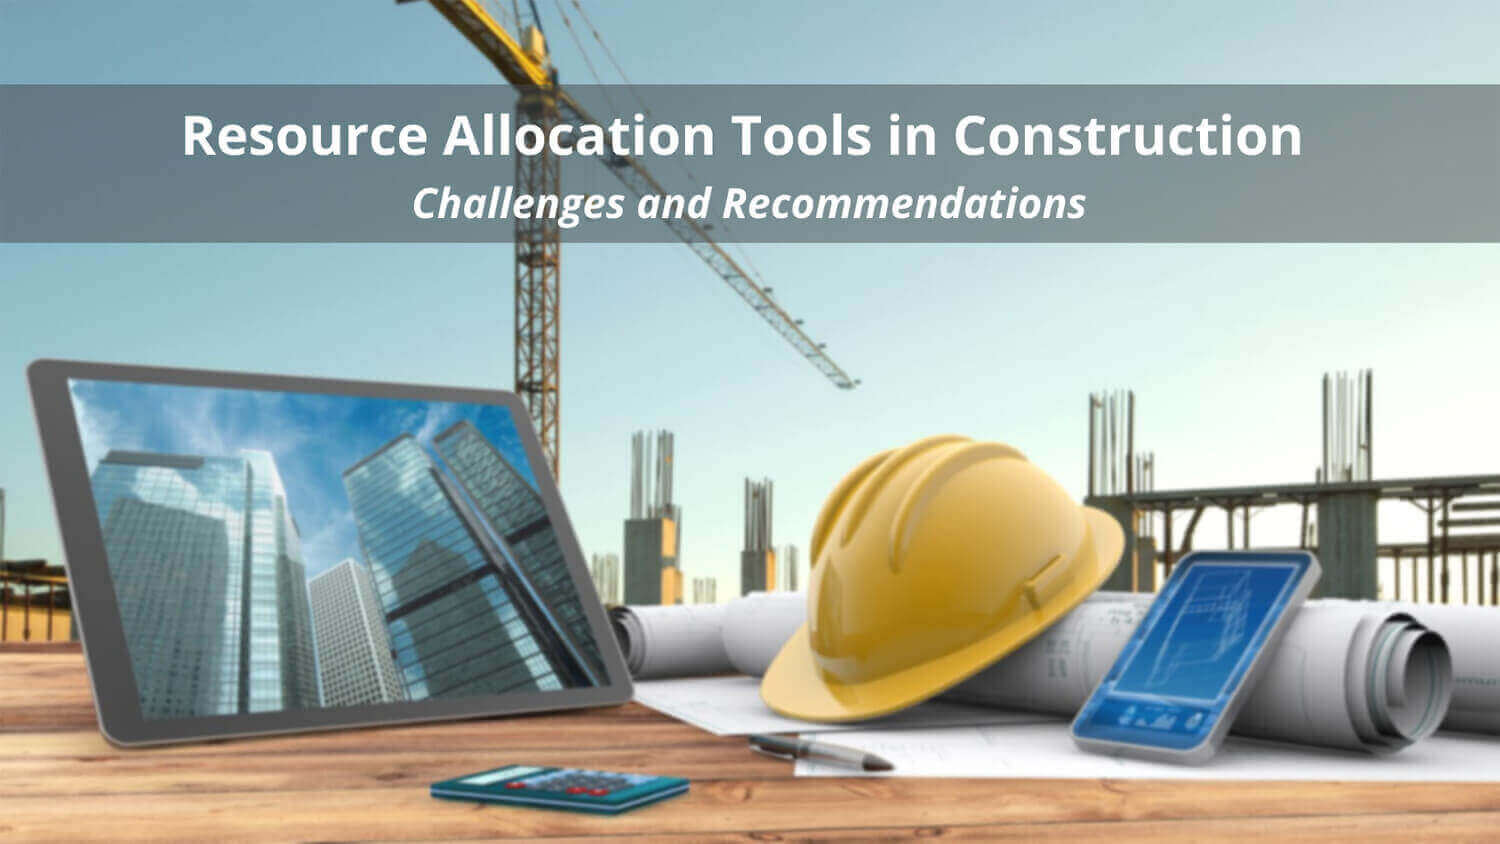 Resource Allocation Tools in Construction - Challenges and Recommendations